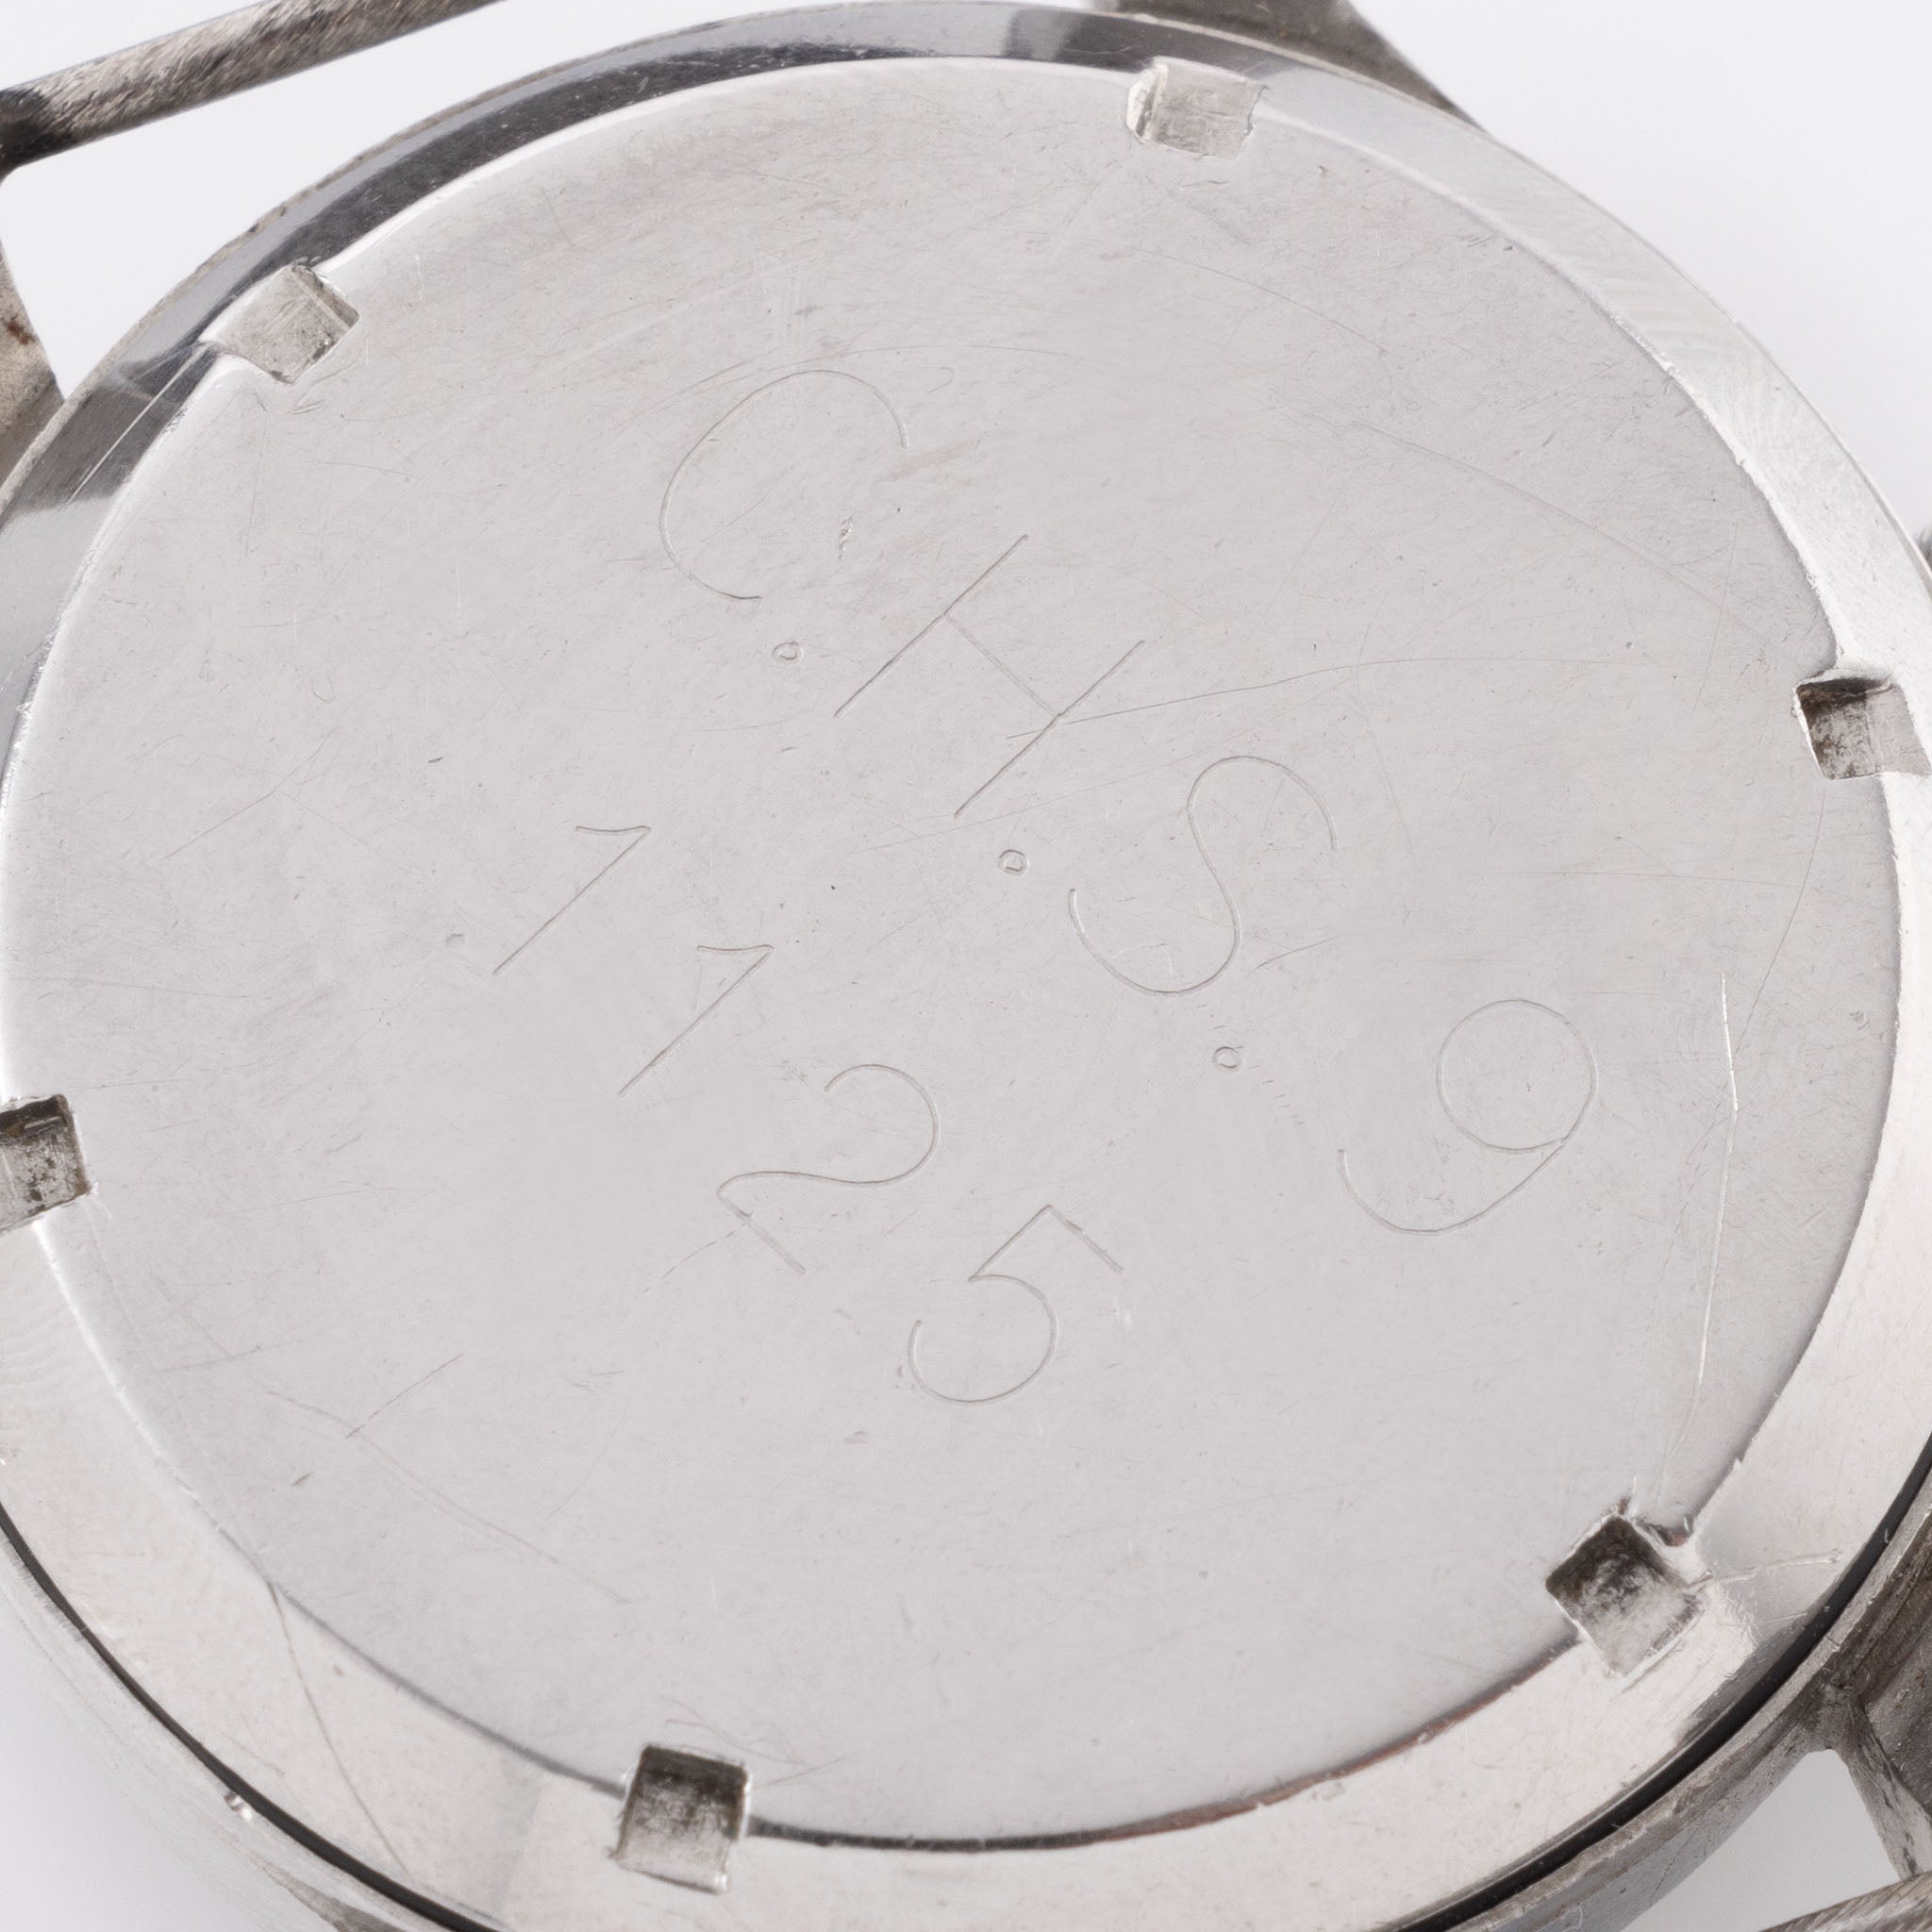 Lemania Monopusher Chronograph Issued to Canadian Naval Forces